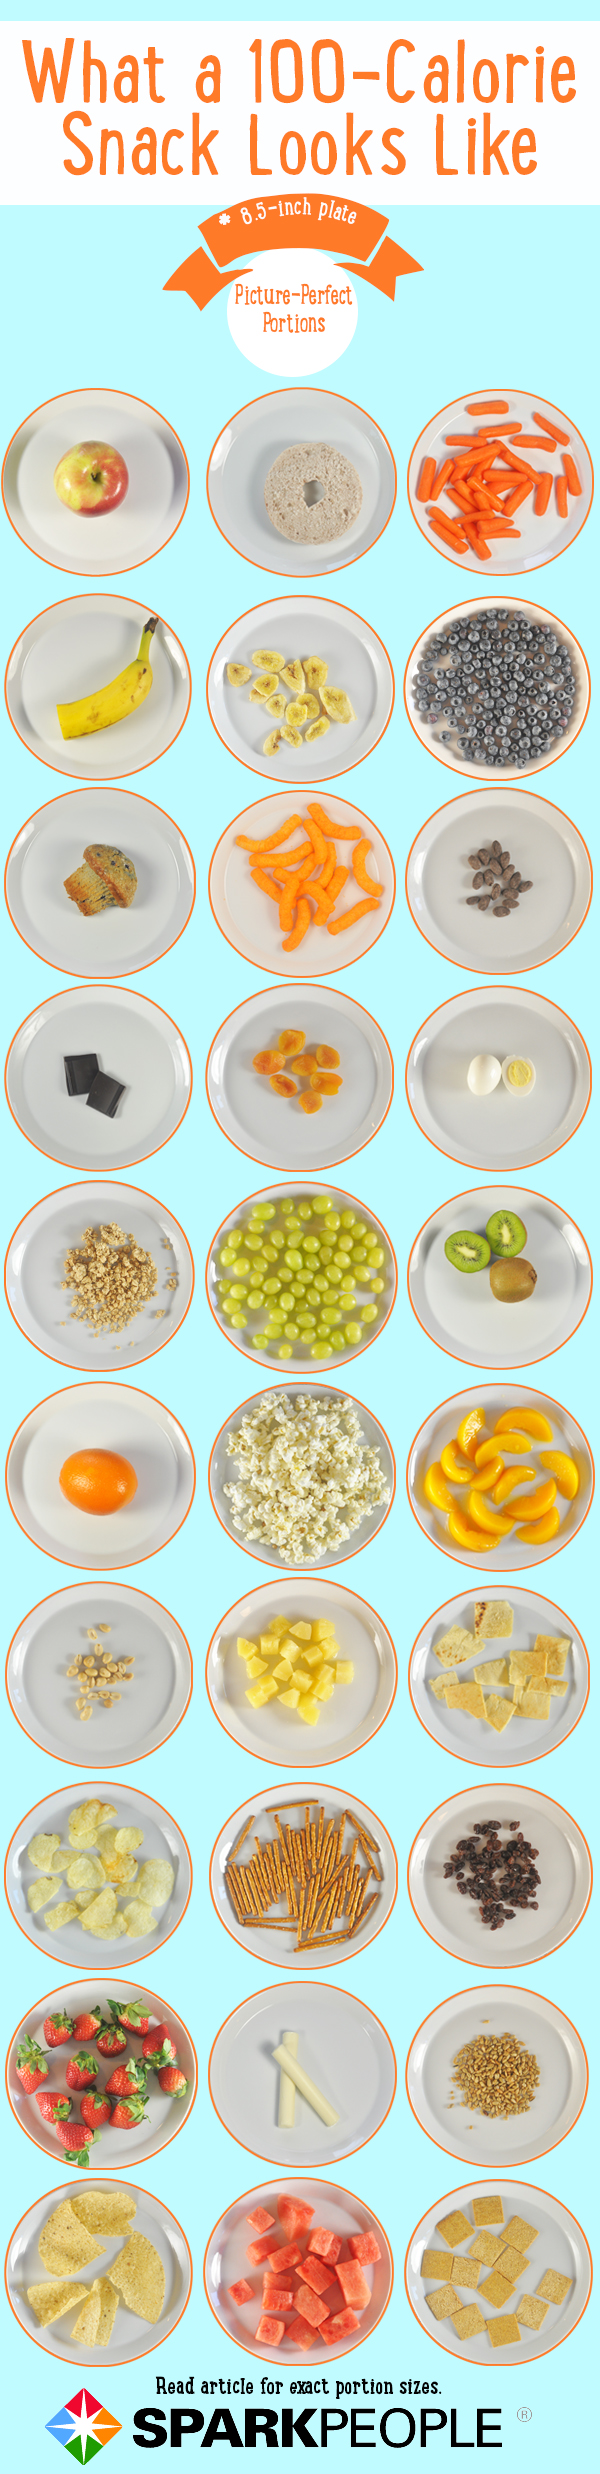 A 100-Calorie Snack: What Does It Look Like? Infographic